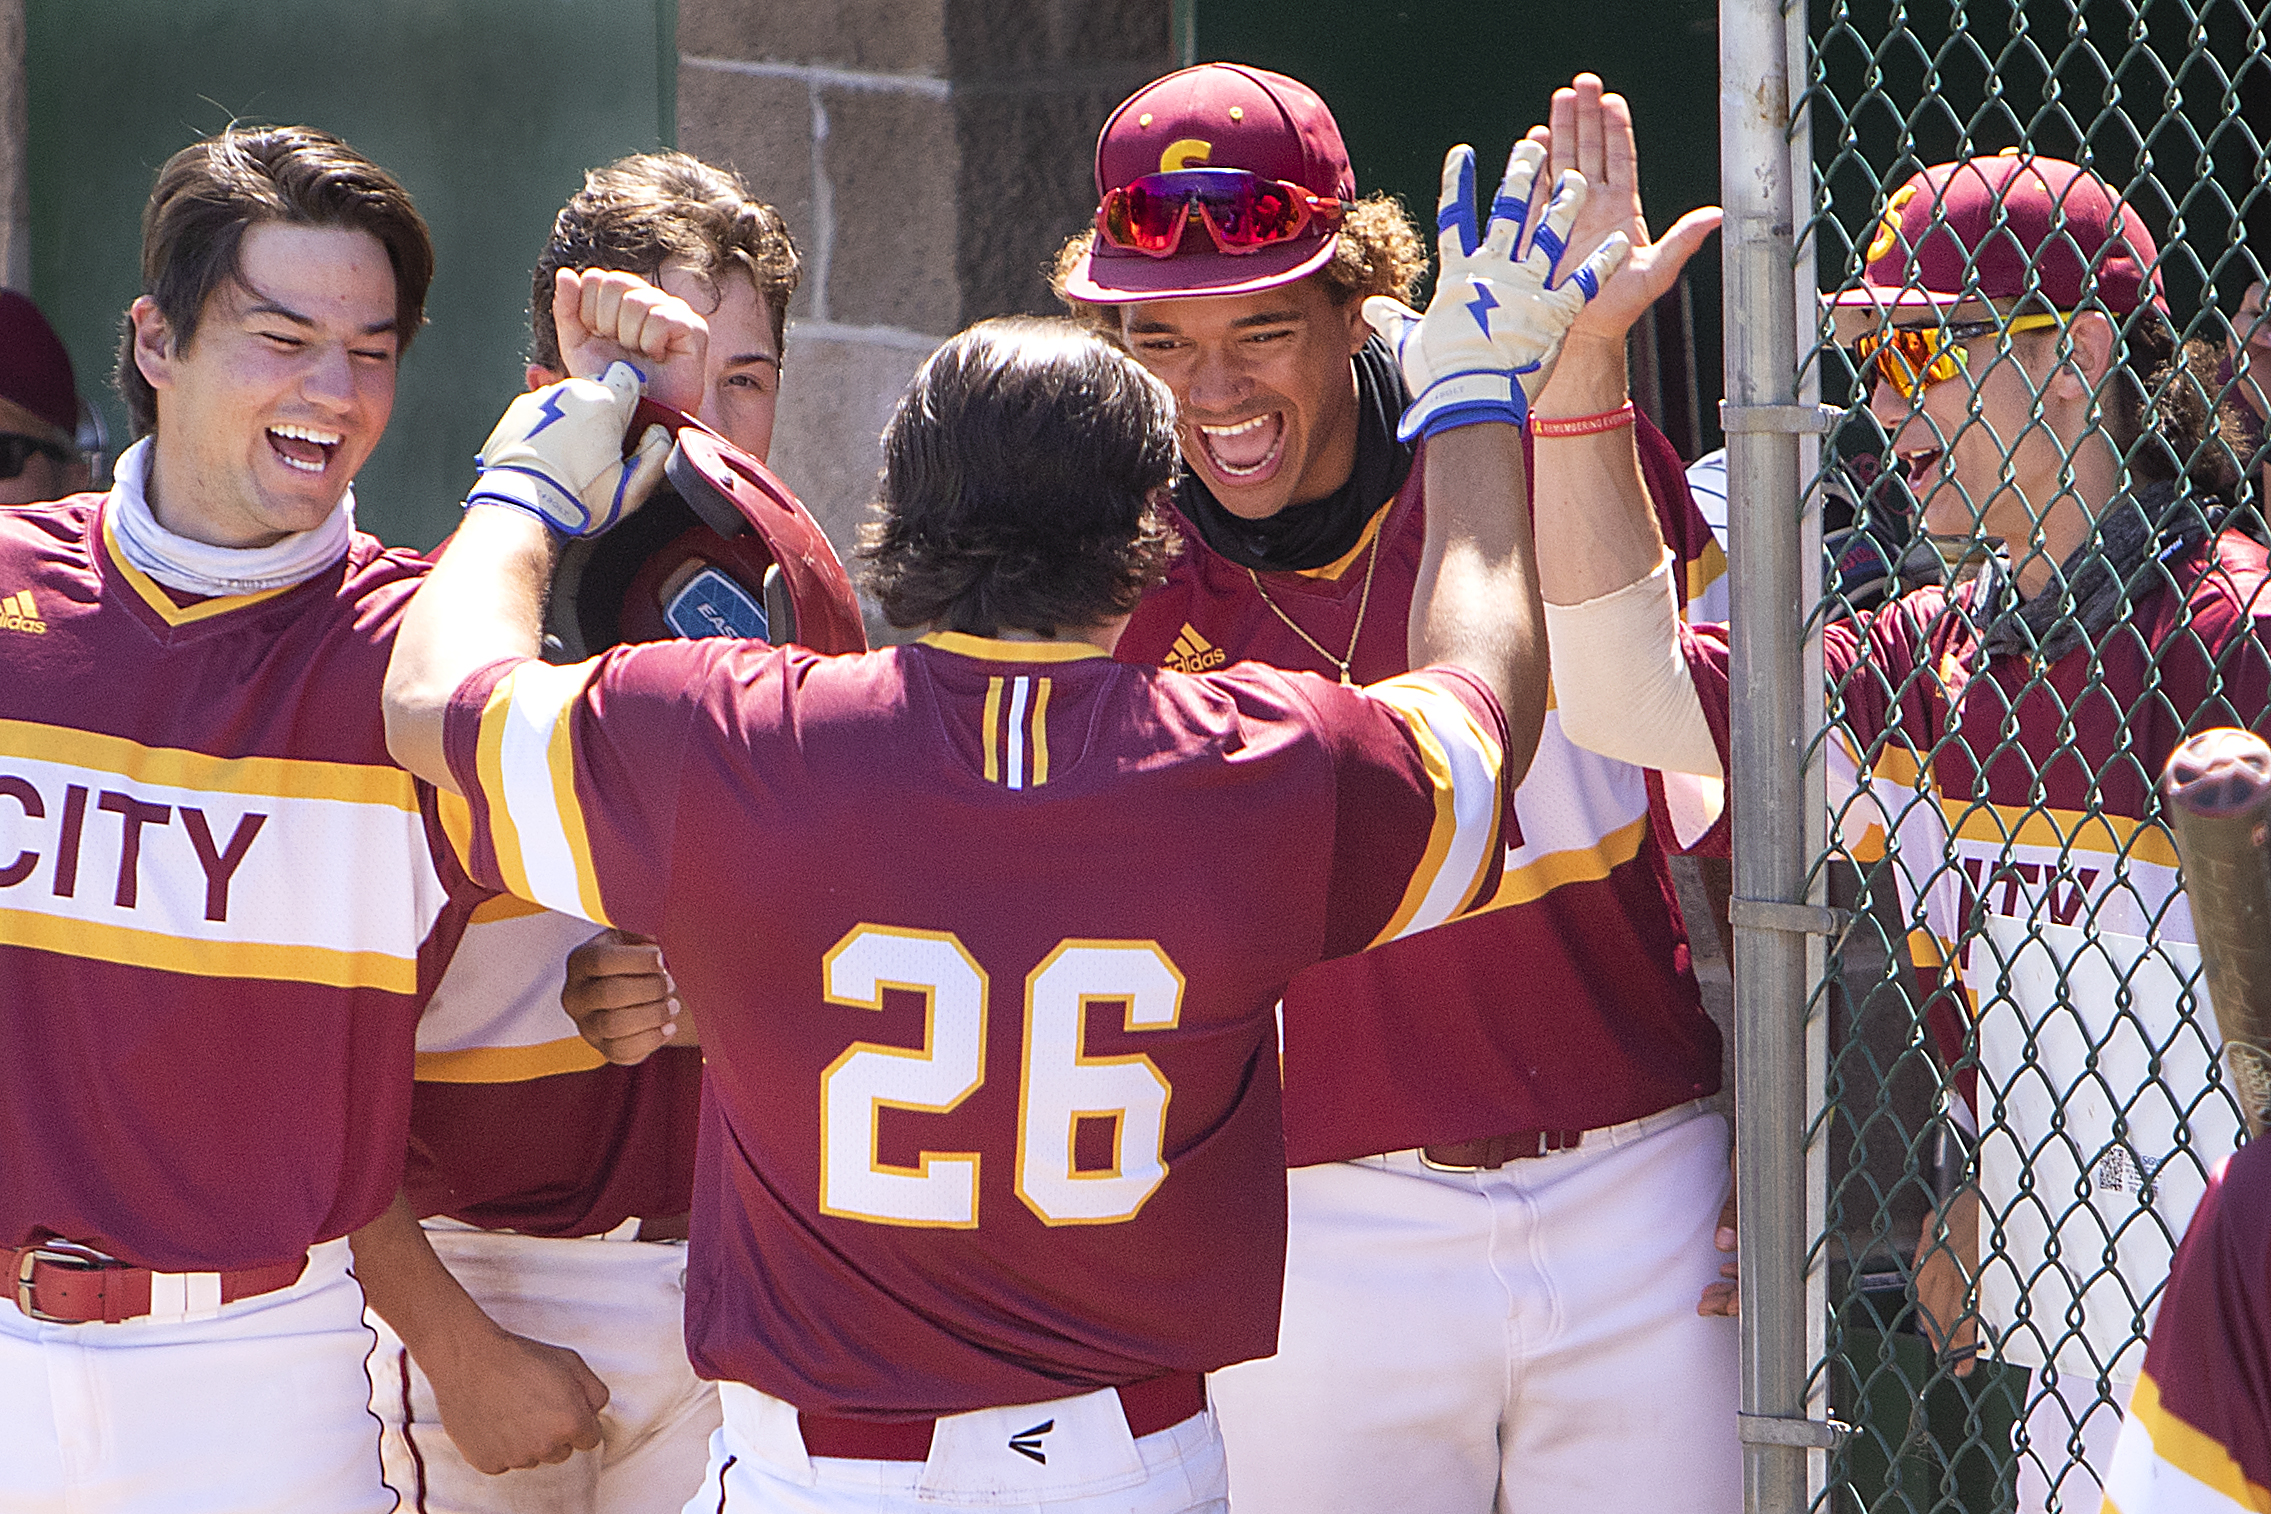 Tweedt's 2-run homer powers the Panthers to a 3-run 4th, but SCC ties Folsom Lake 3-3